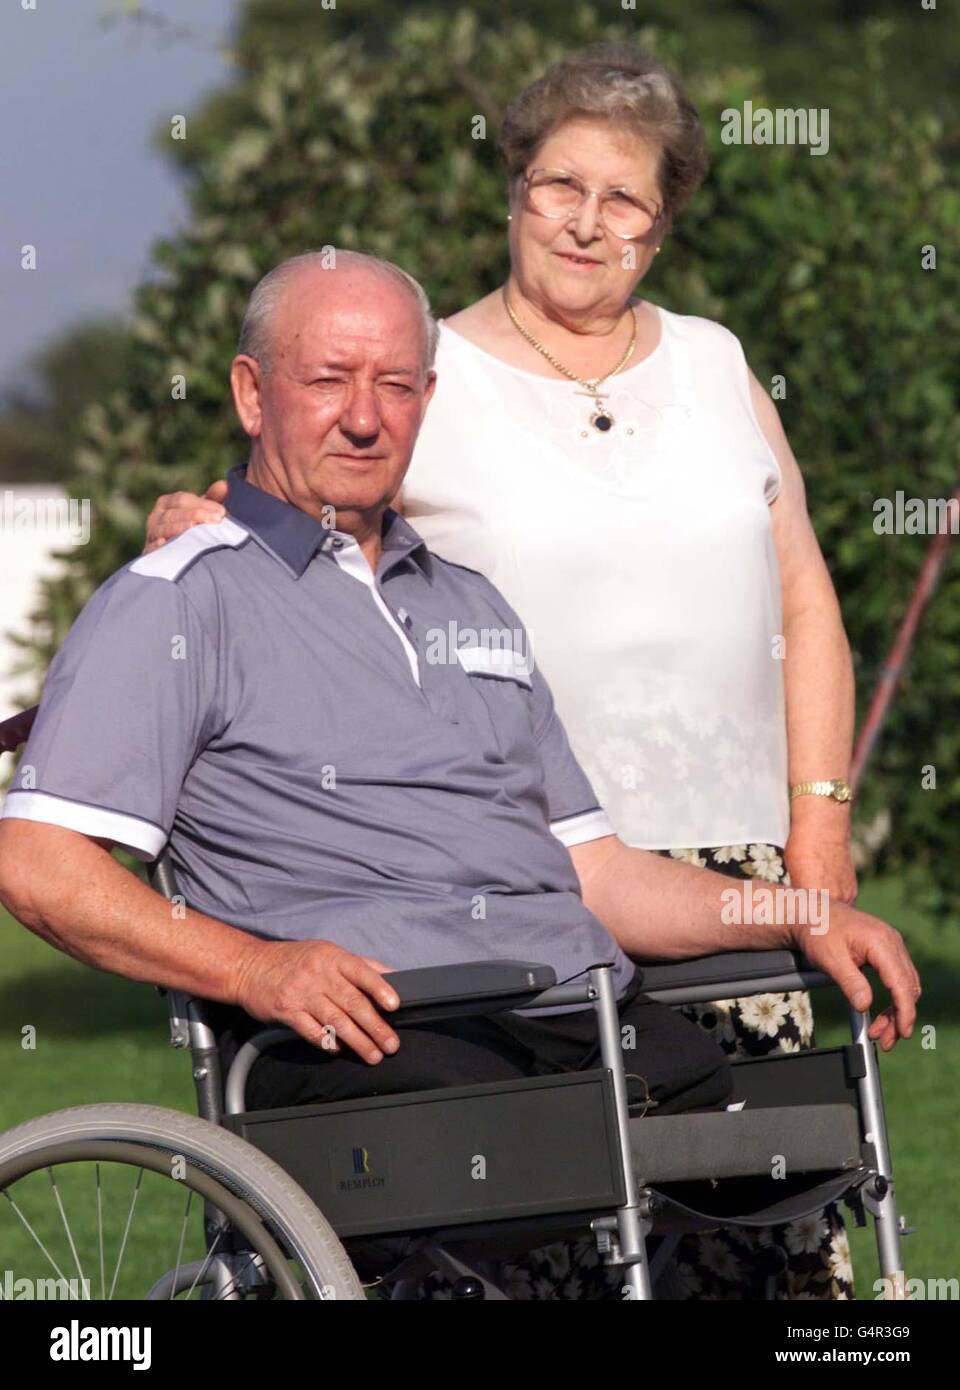 Ronnie Pollock with his wfe Georgie outside their County Down home. Mr Pollock, 70, a former policeman lost his legs when a booby trap bomb exploded under his car in 1981. Stock Photo